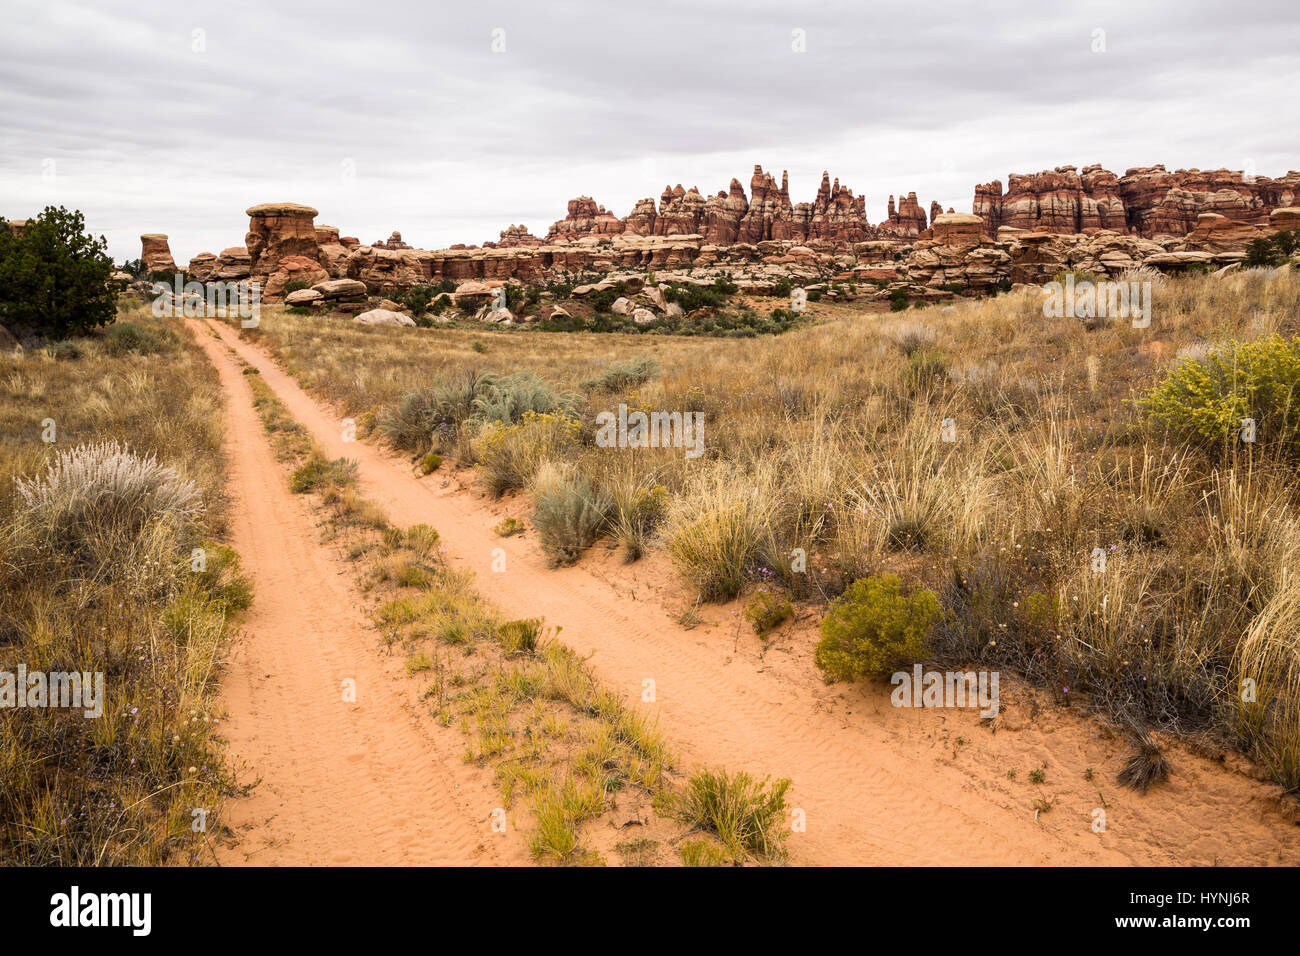 A 4x4 road runs through sagebrush and sandstone towers and spires of hte desert of southern Utah. Stock Photo